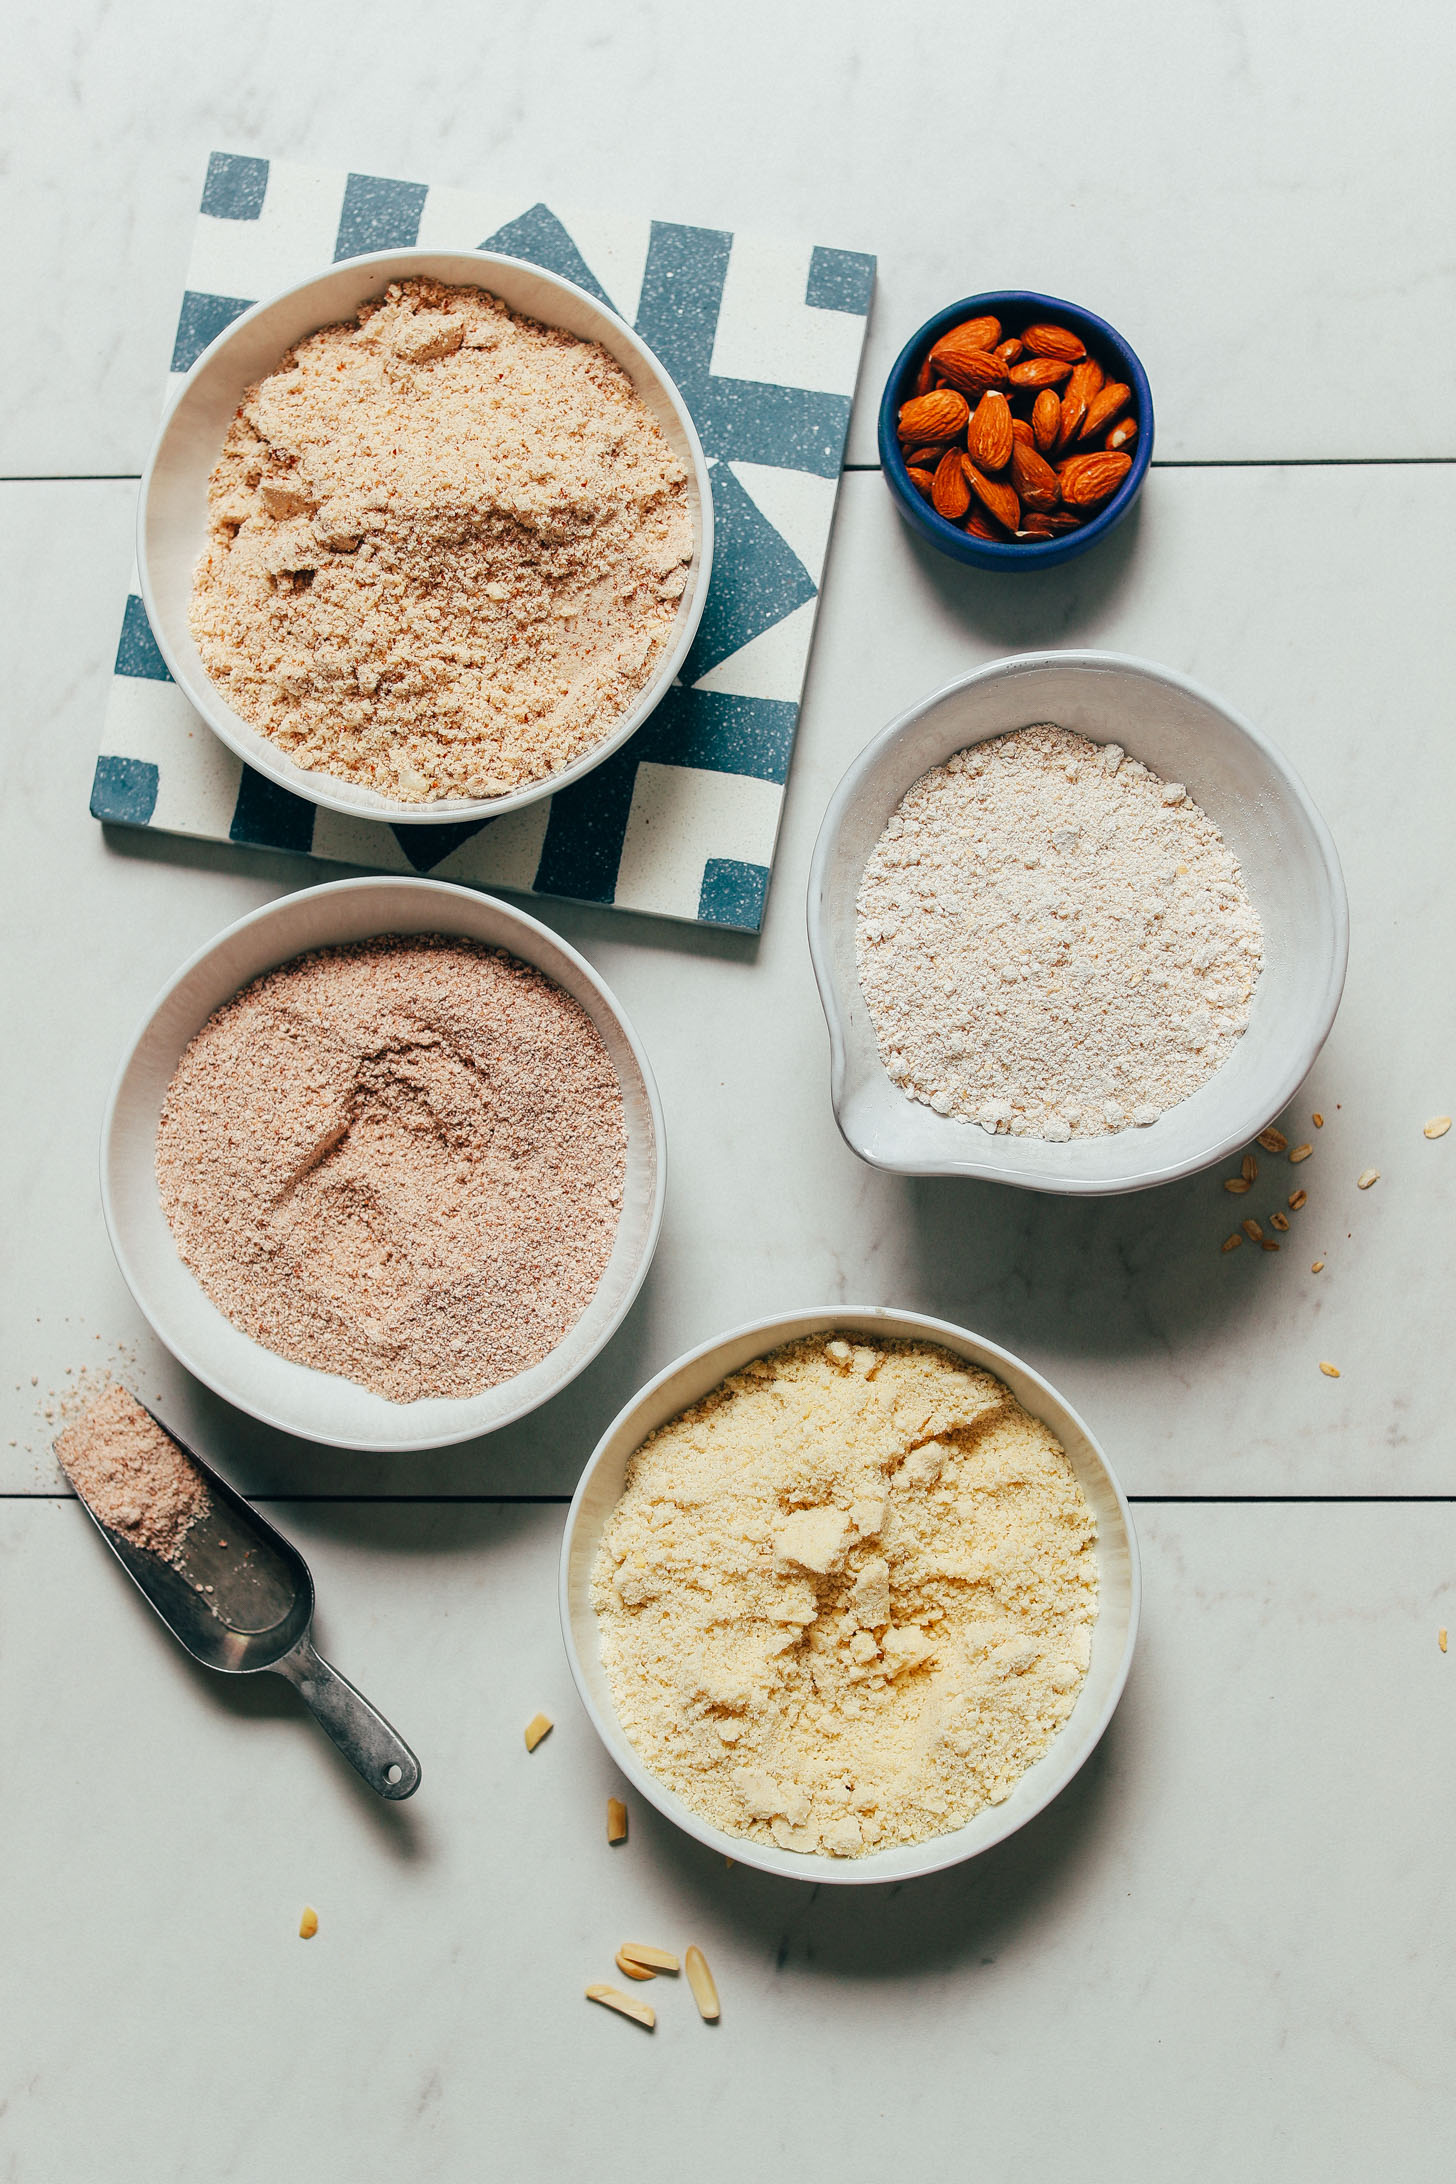 Bowls of oat flour, almond flour, almond meal, and almond pulp for our guide to how to use gluten-free flours